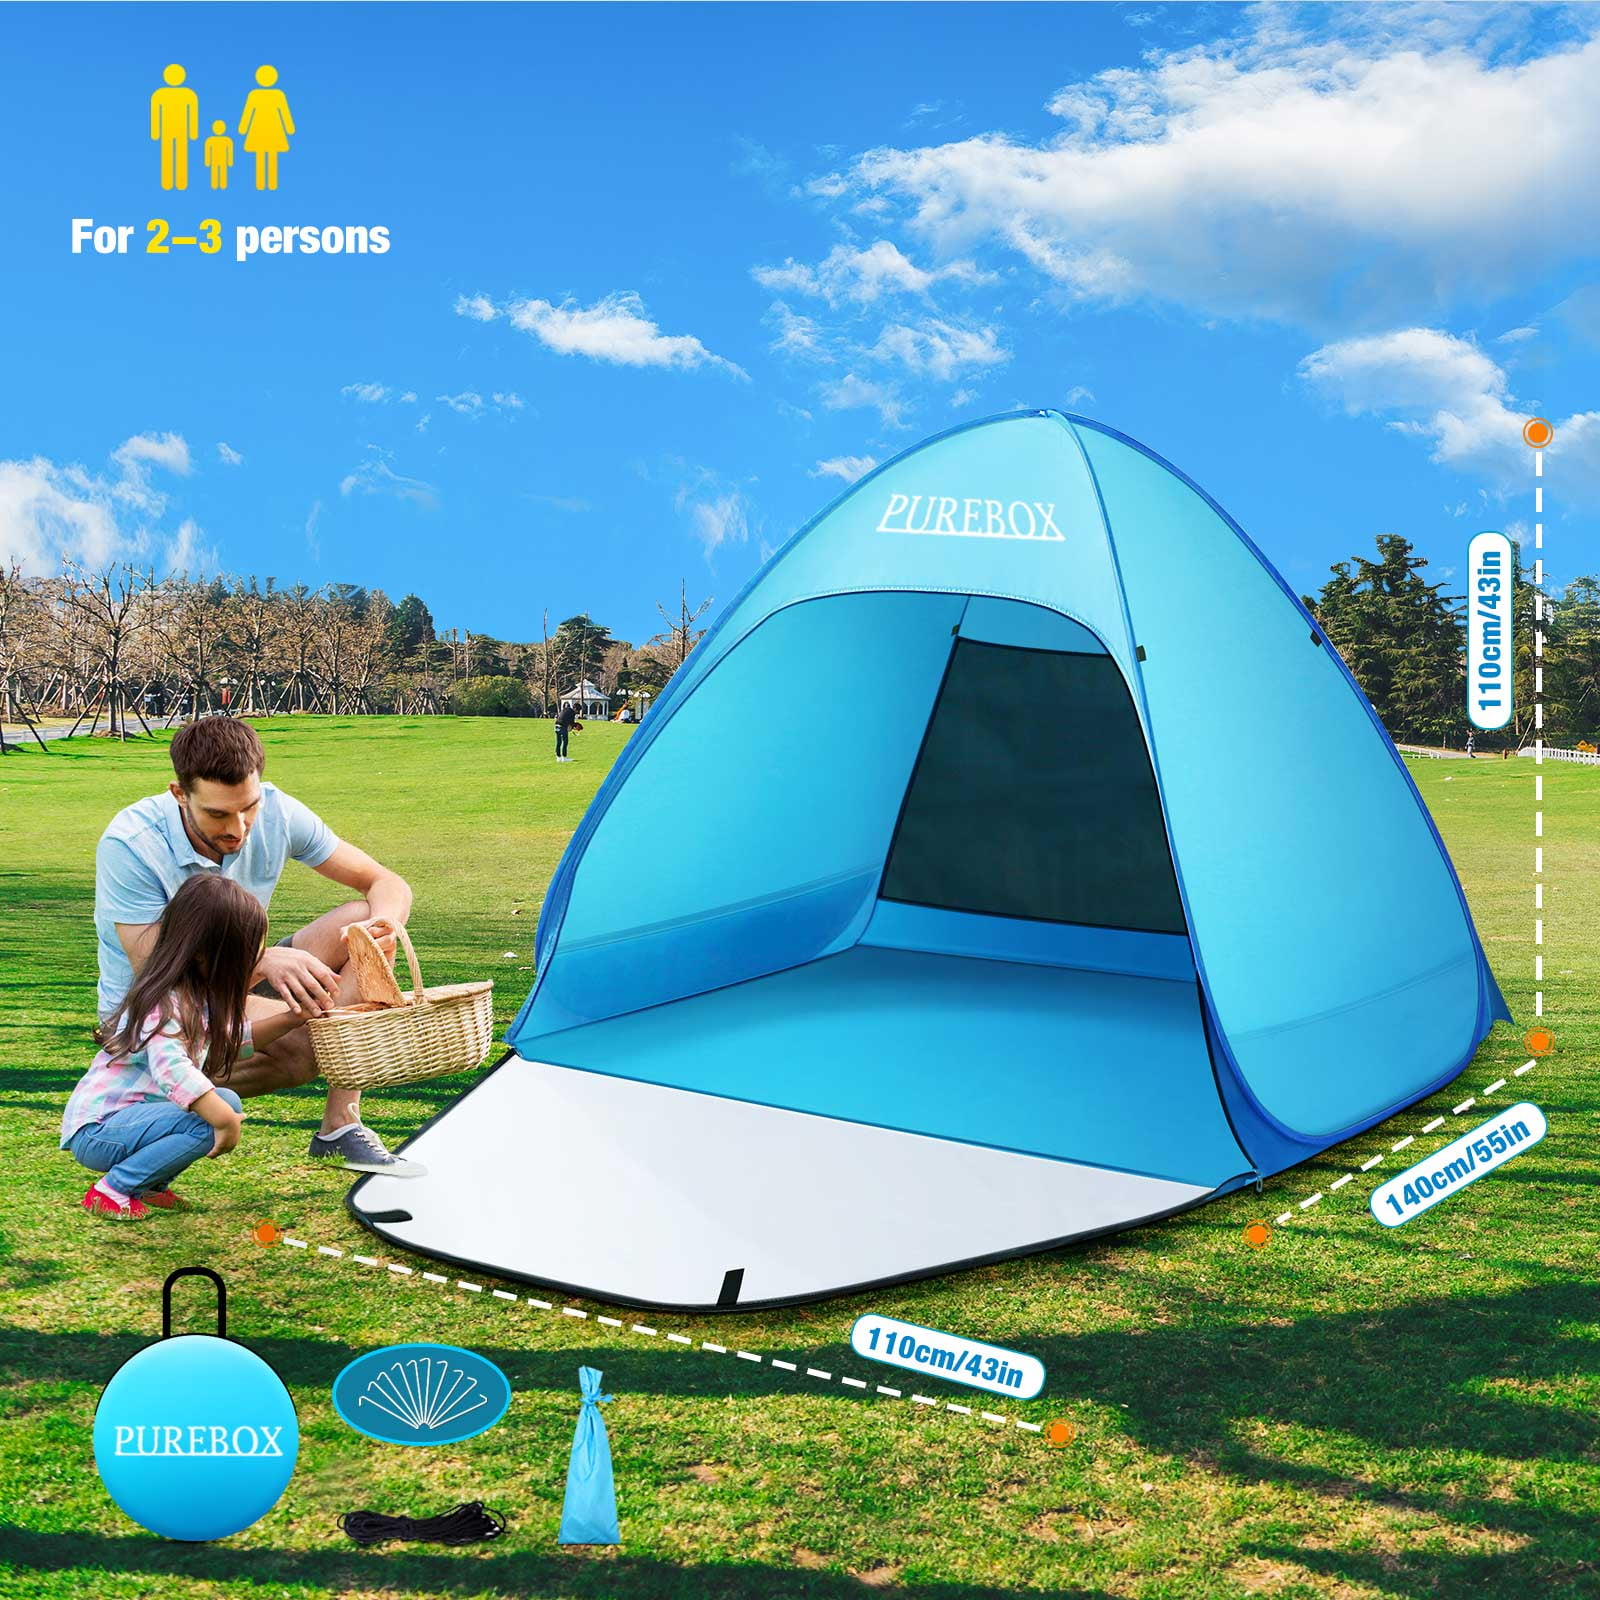 Large Pop Up Beach Fishing Camping Garden Tent Shelter UV 50 Protection UK 